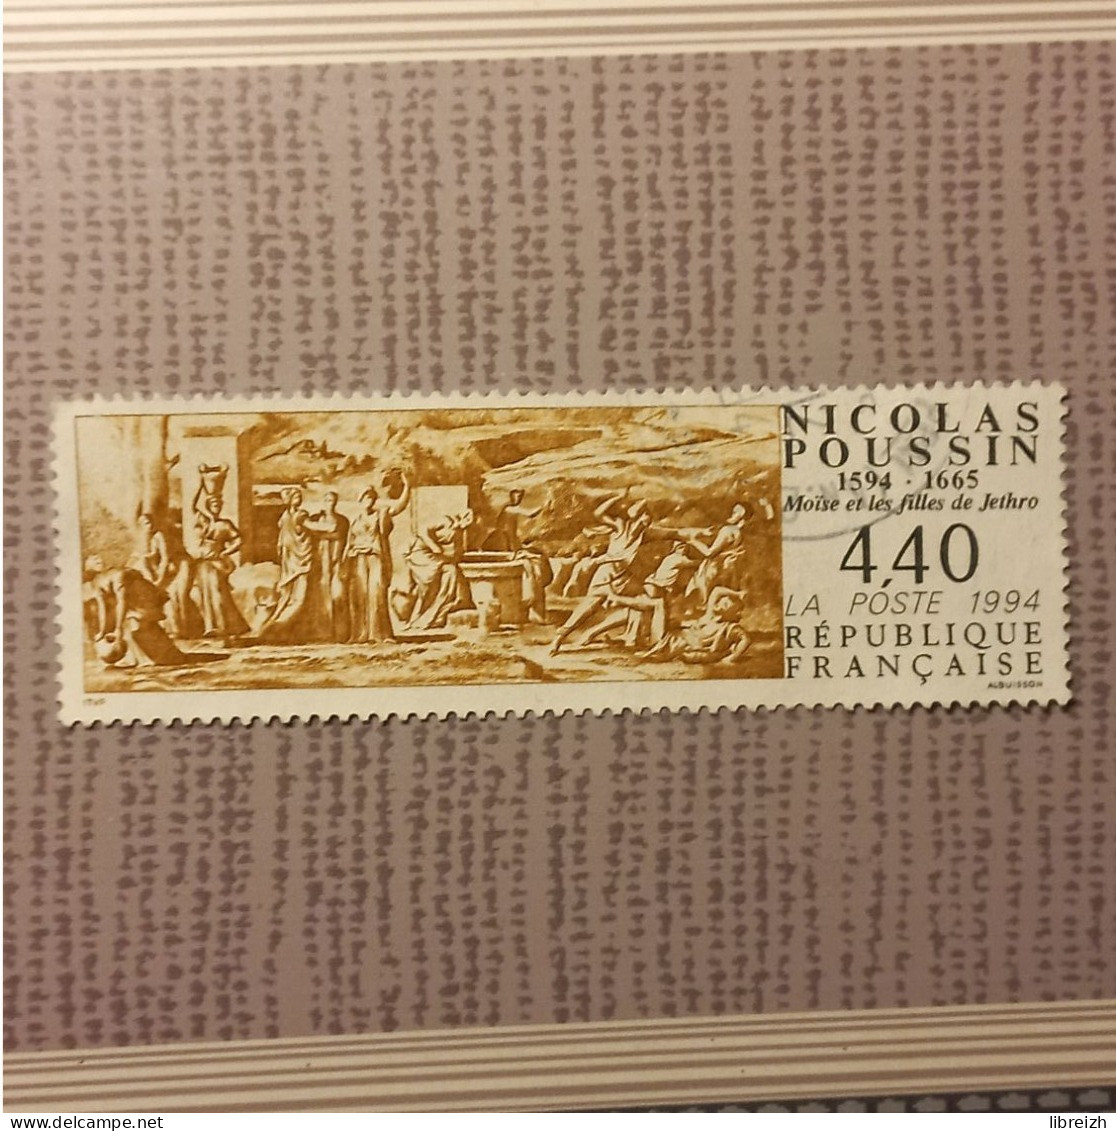 Nicolas Poussin  N° 2896  Année 1994 - Used Stamps